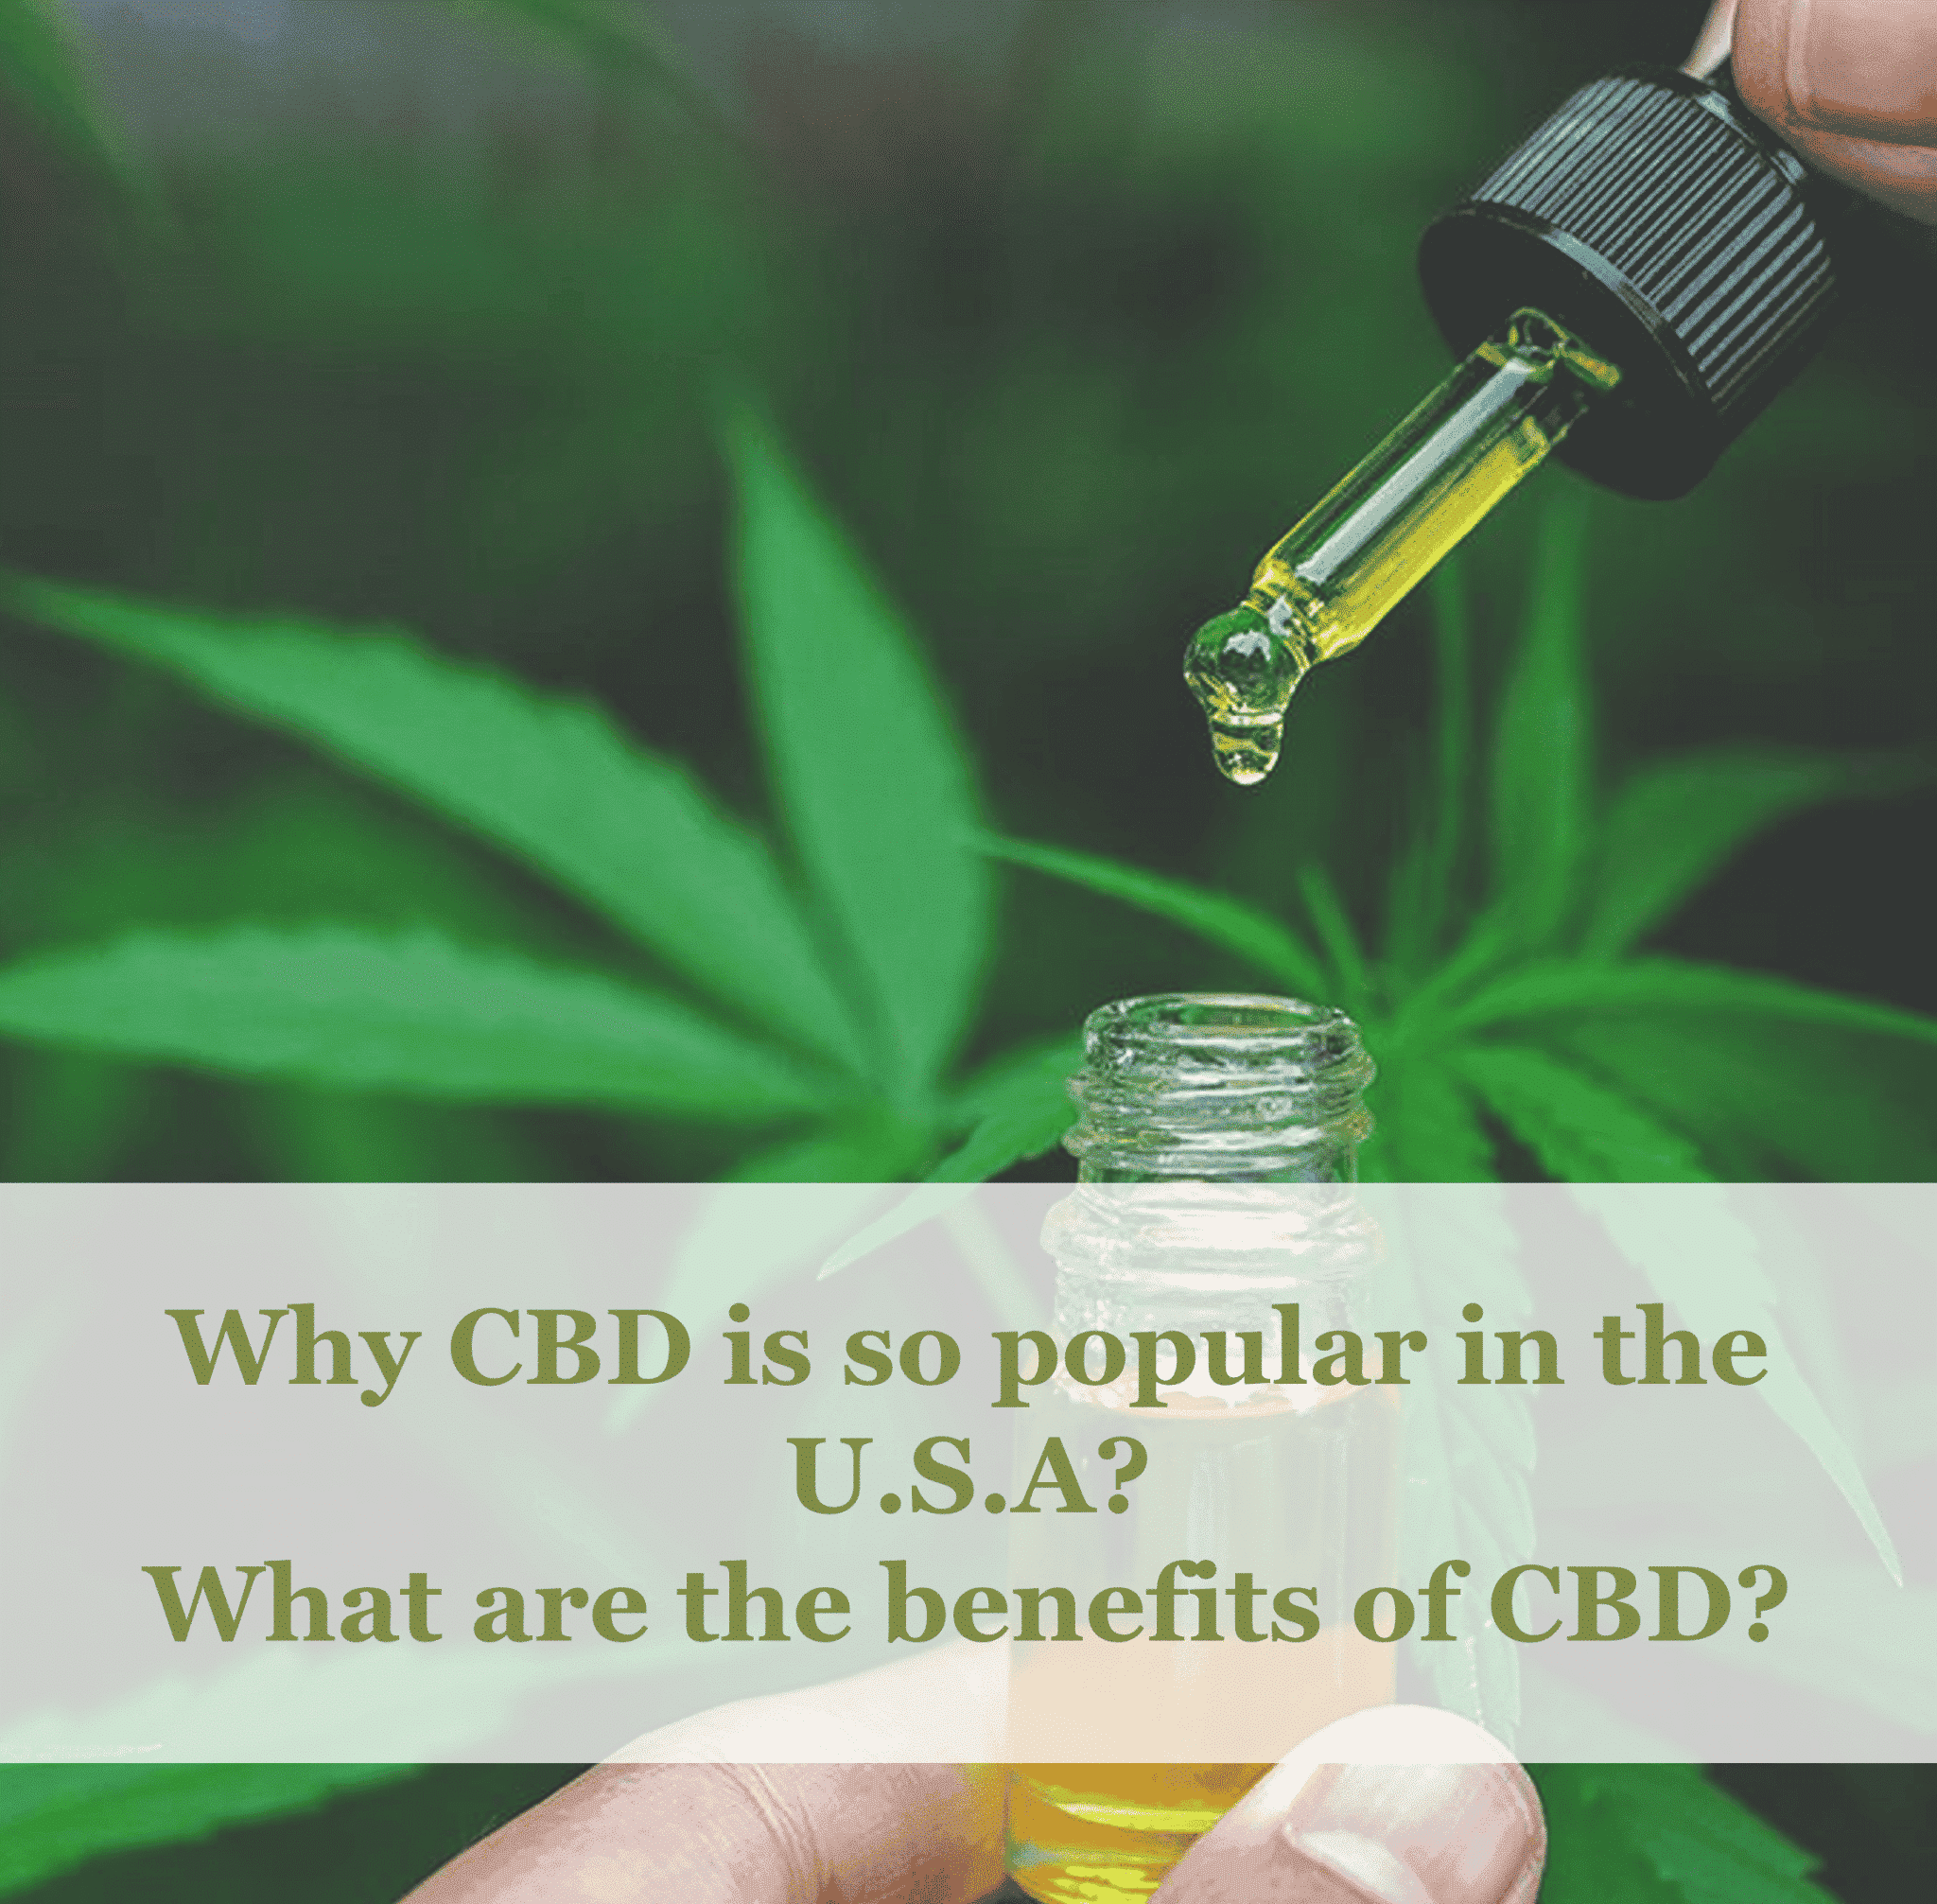 Why CBD is so popular in the U.S.A? What are the benefits of CBD?